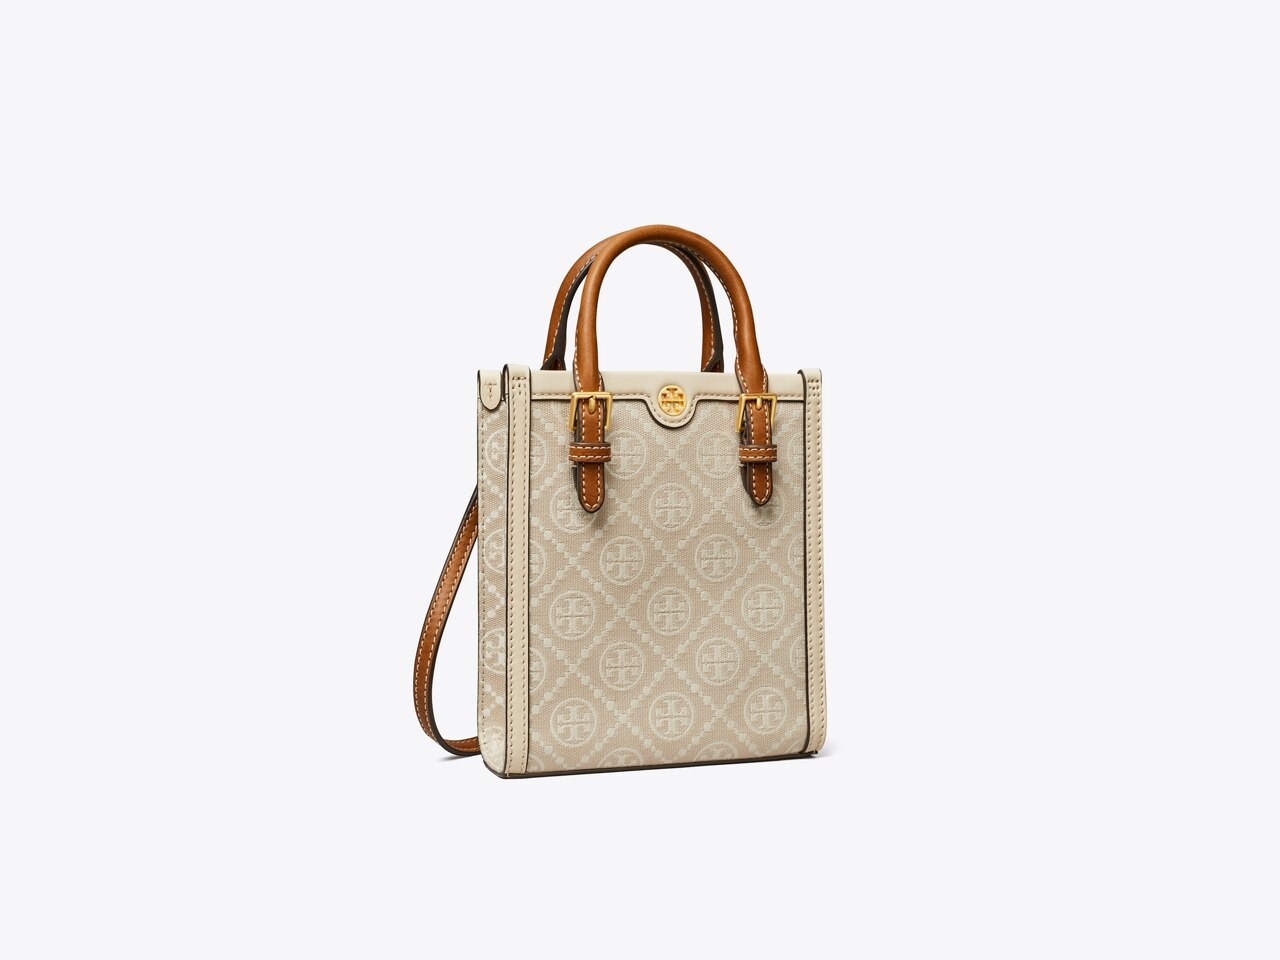 Tory Burch Mini T Monogram Perforated Leather Bucket Bag